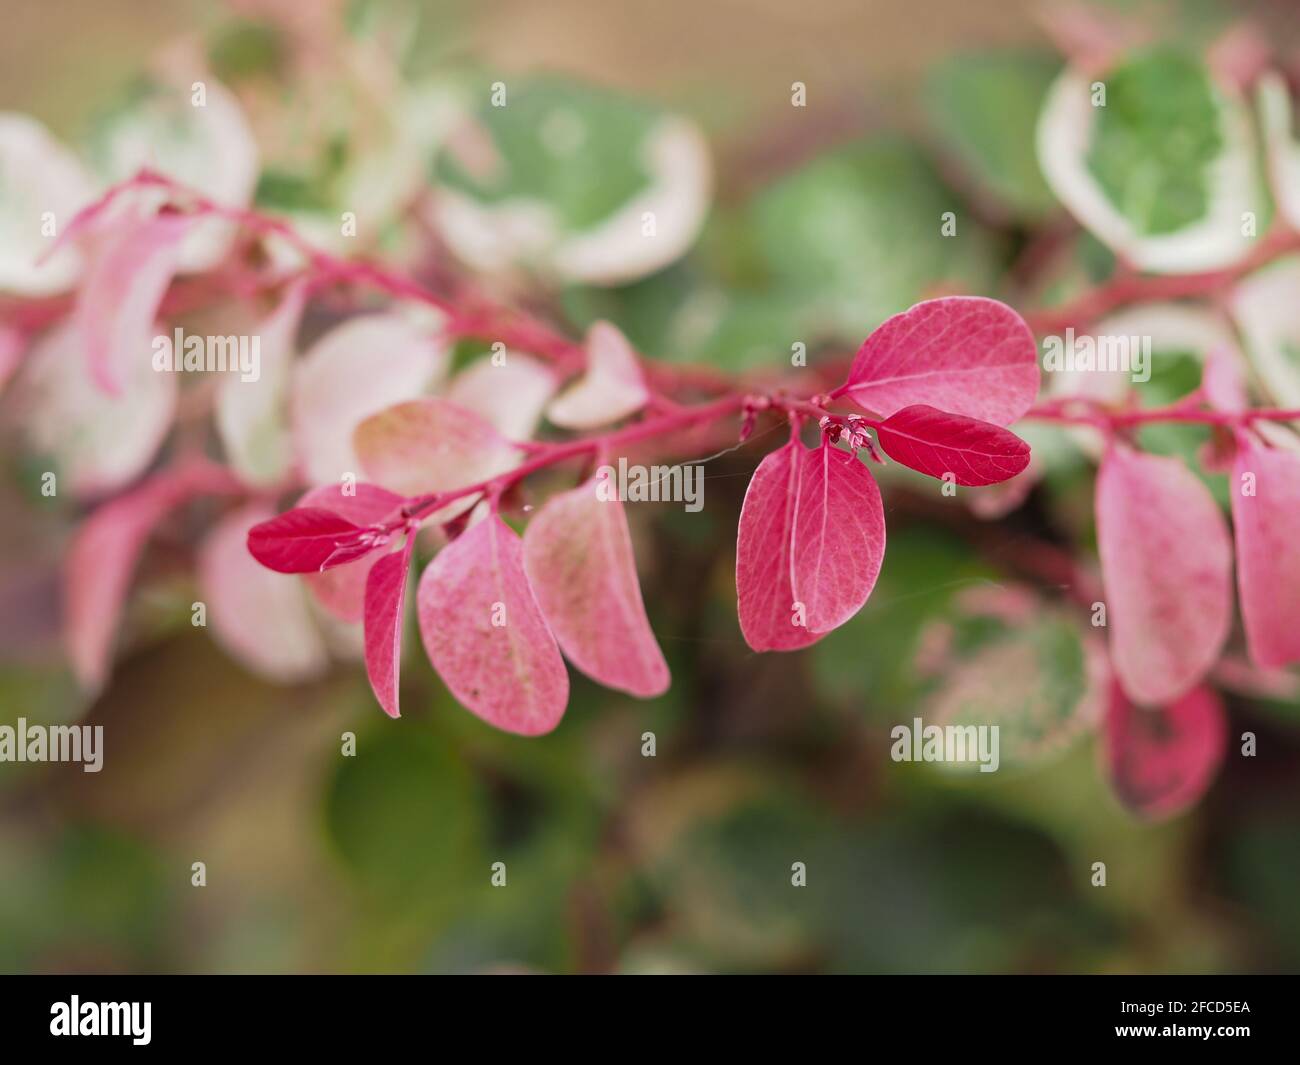 Glorious pink, red and green and white speckled leaves of the ornamental Snow Bush or Breynia disticha on a soft blurred foliage background, macro Stock Photo